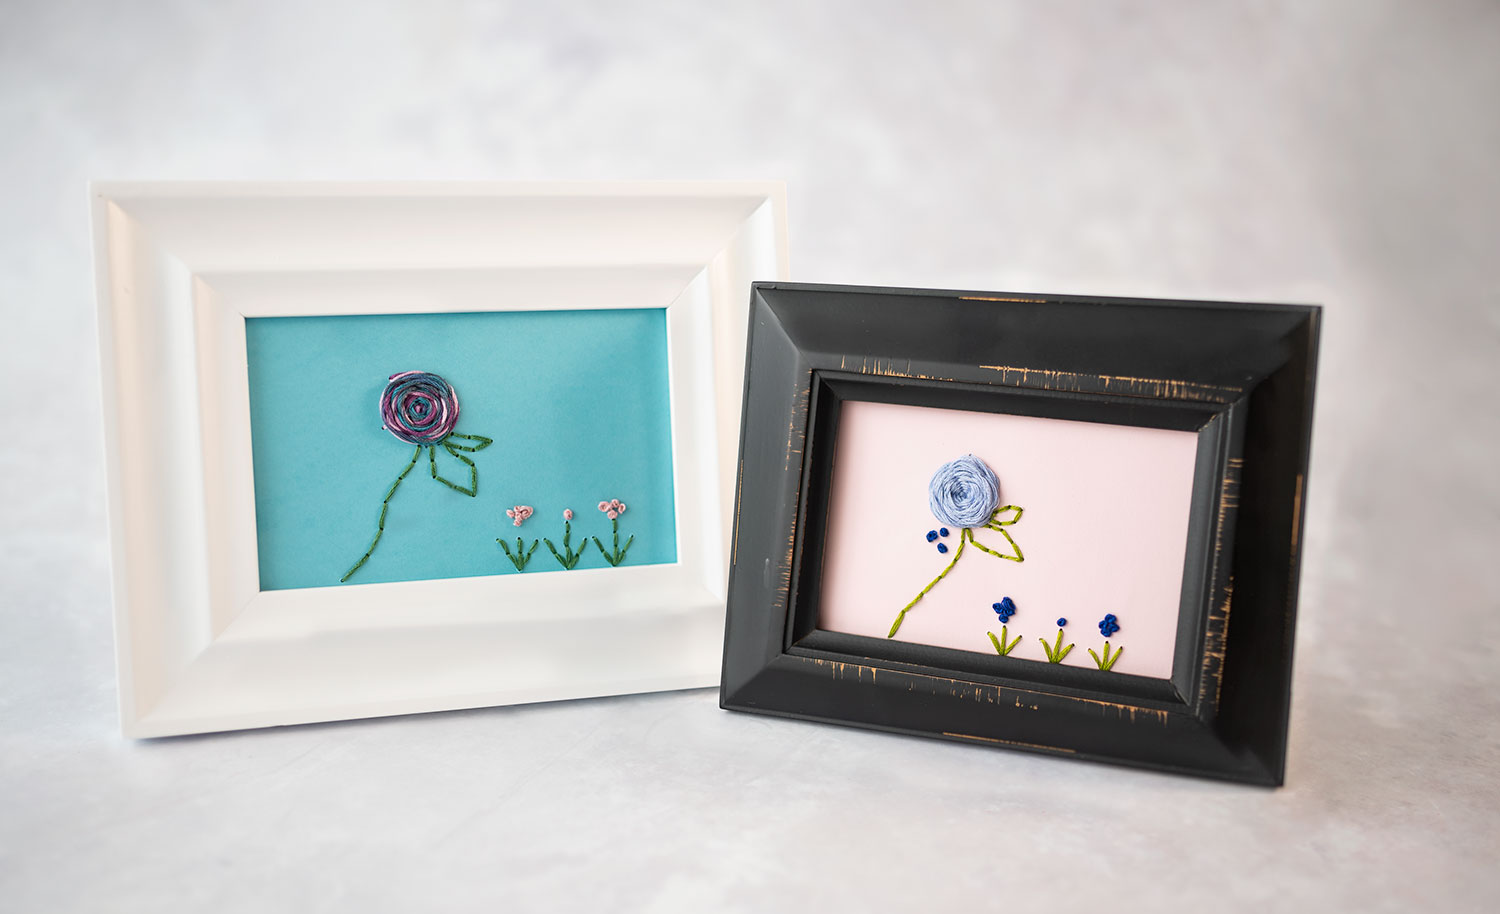 two framed, hand stitched flower designs. One in a white frame and one in a black frame. Both are hand stitched using the included pattern.